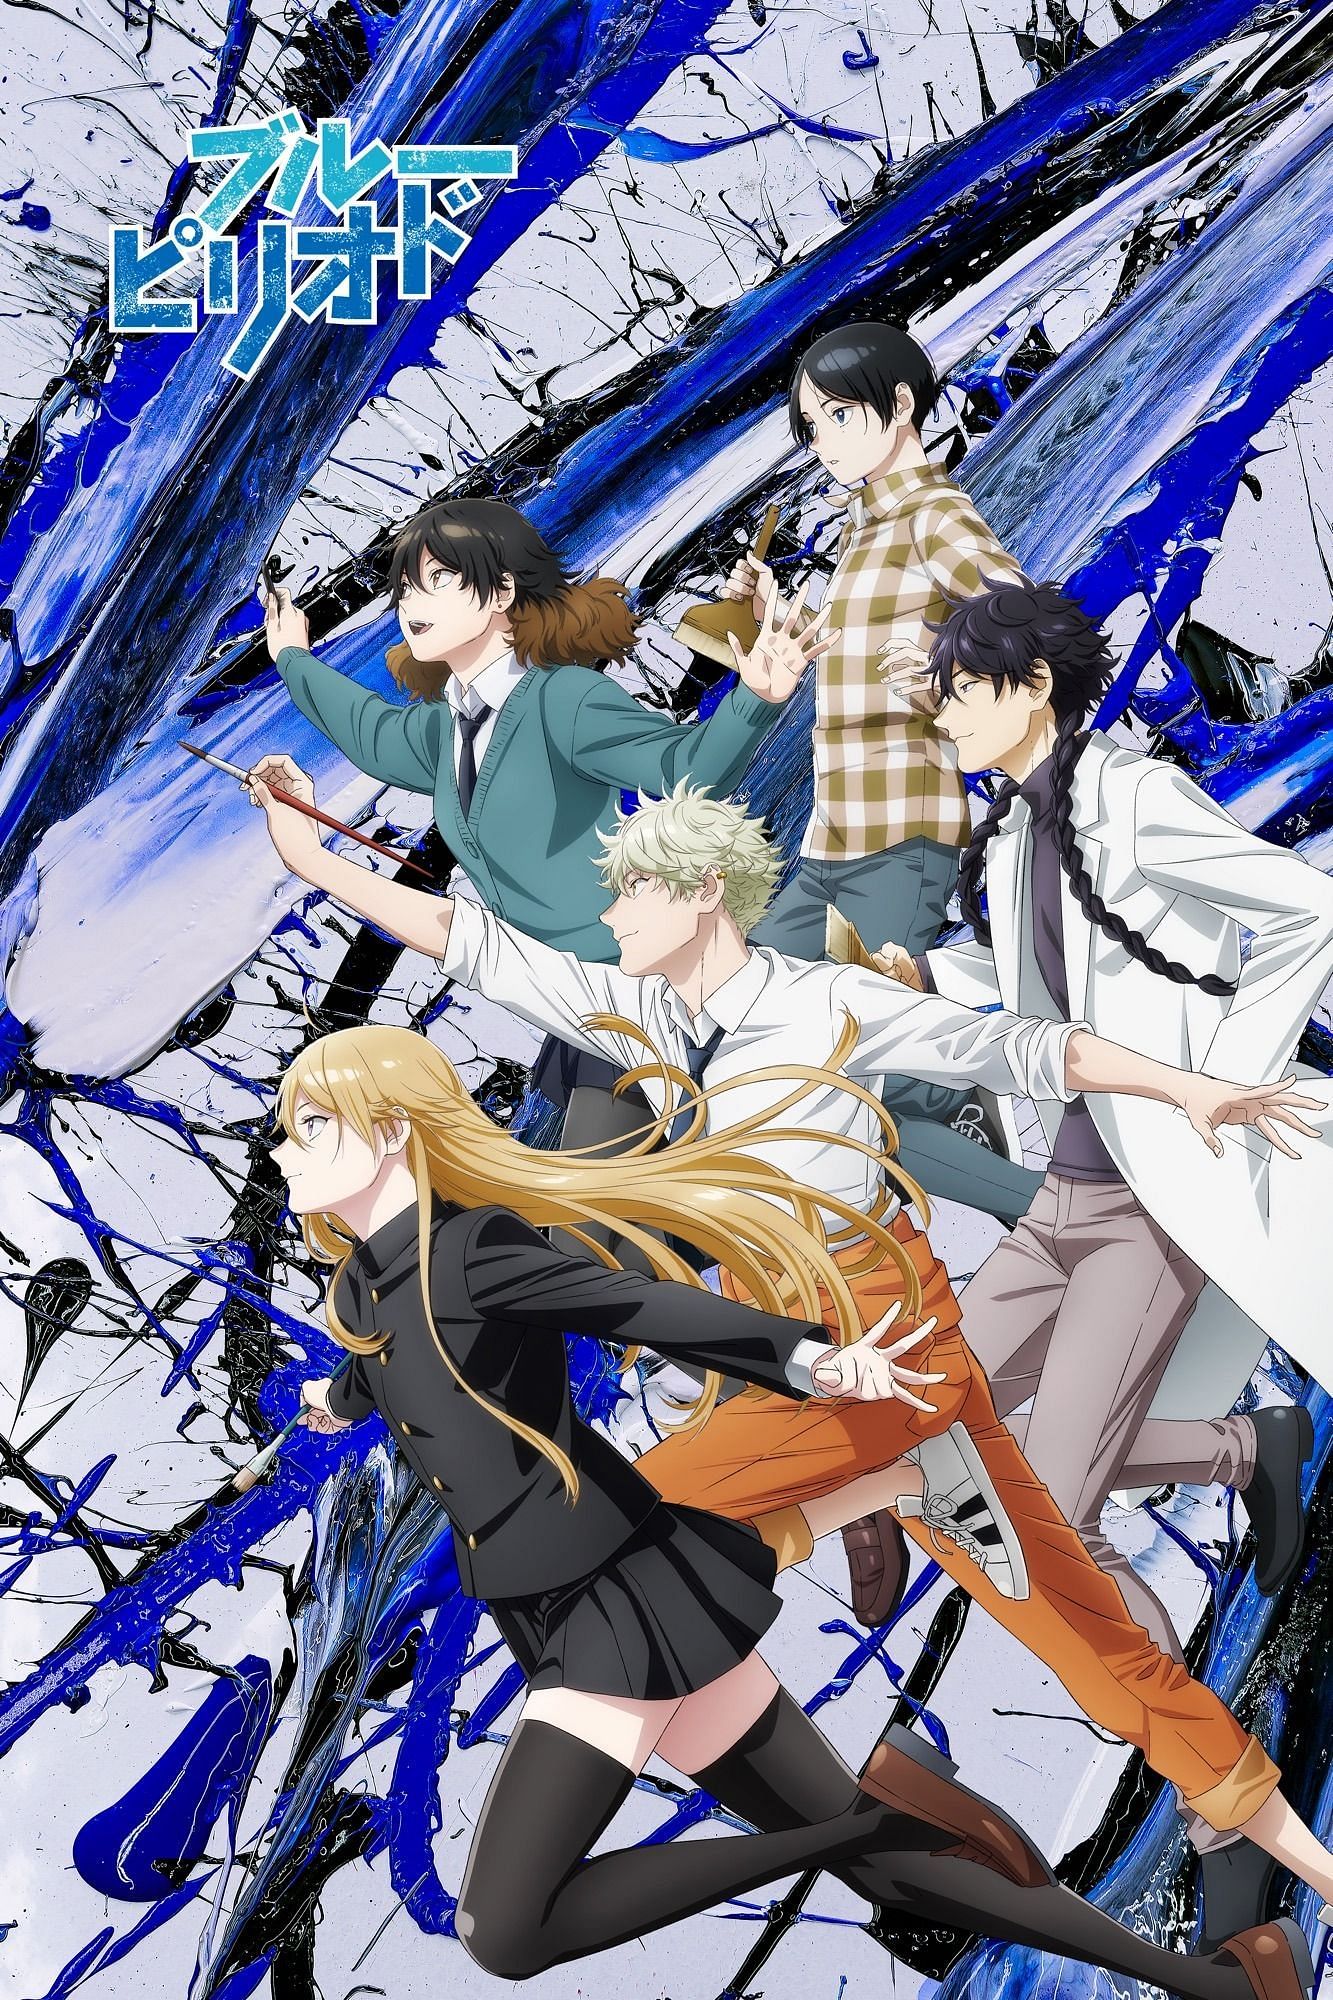 Official art featuring the main characters (Image via Seven Arcs Studio)